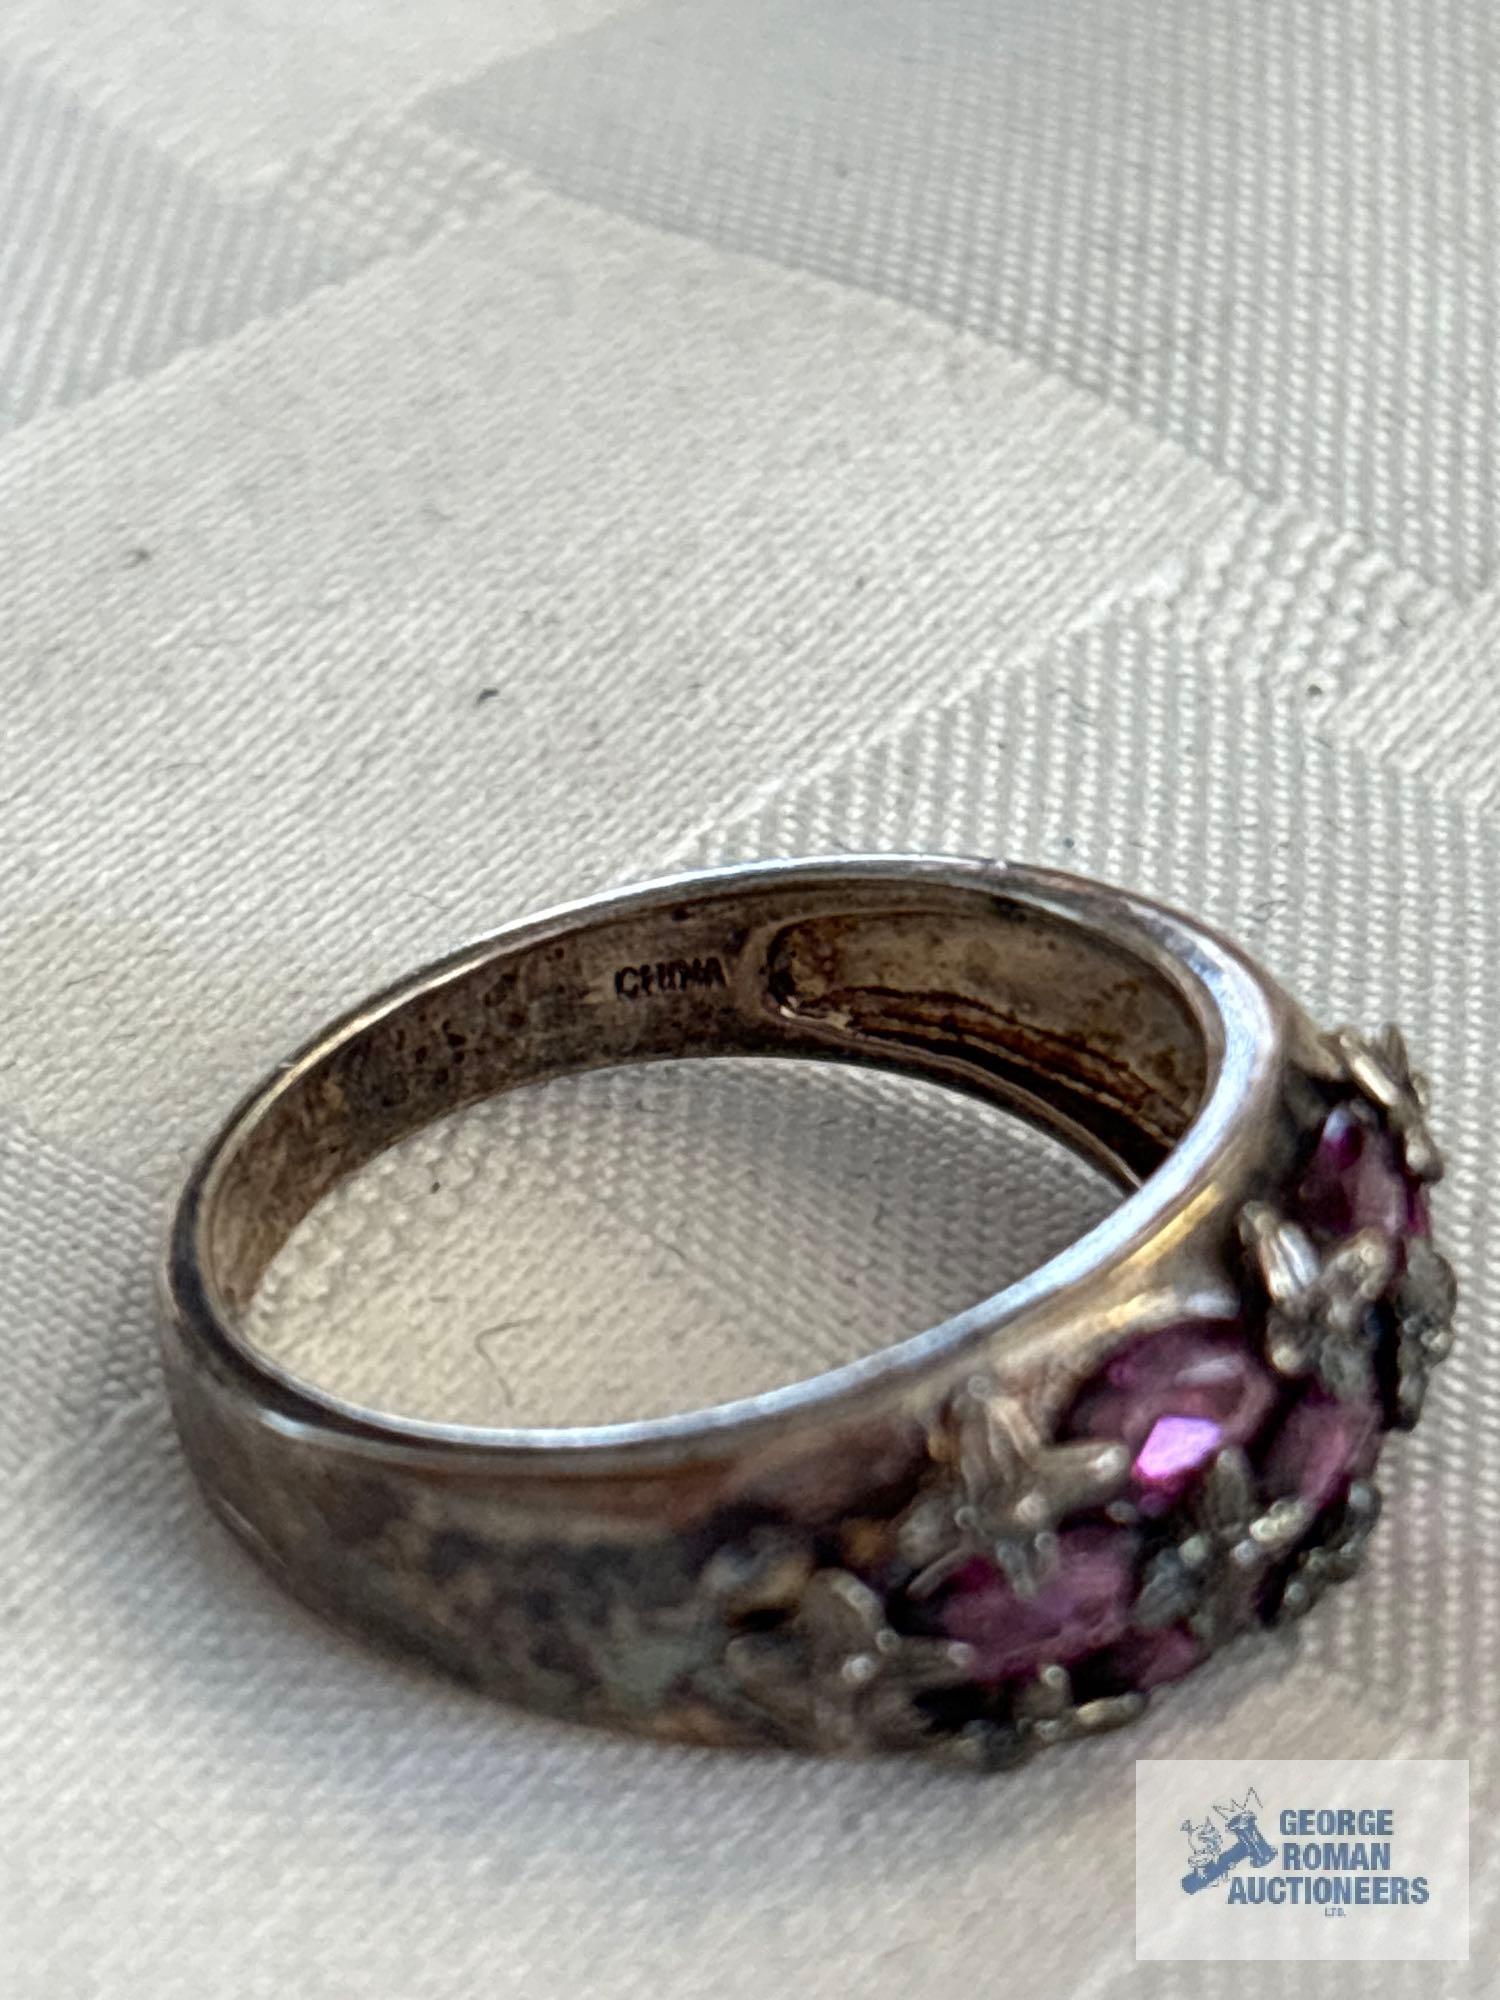 Silver colored ring with purple gemstones, marked 925, approximate total weight is 5.02 G